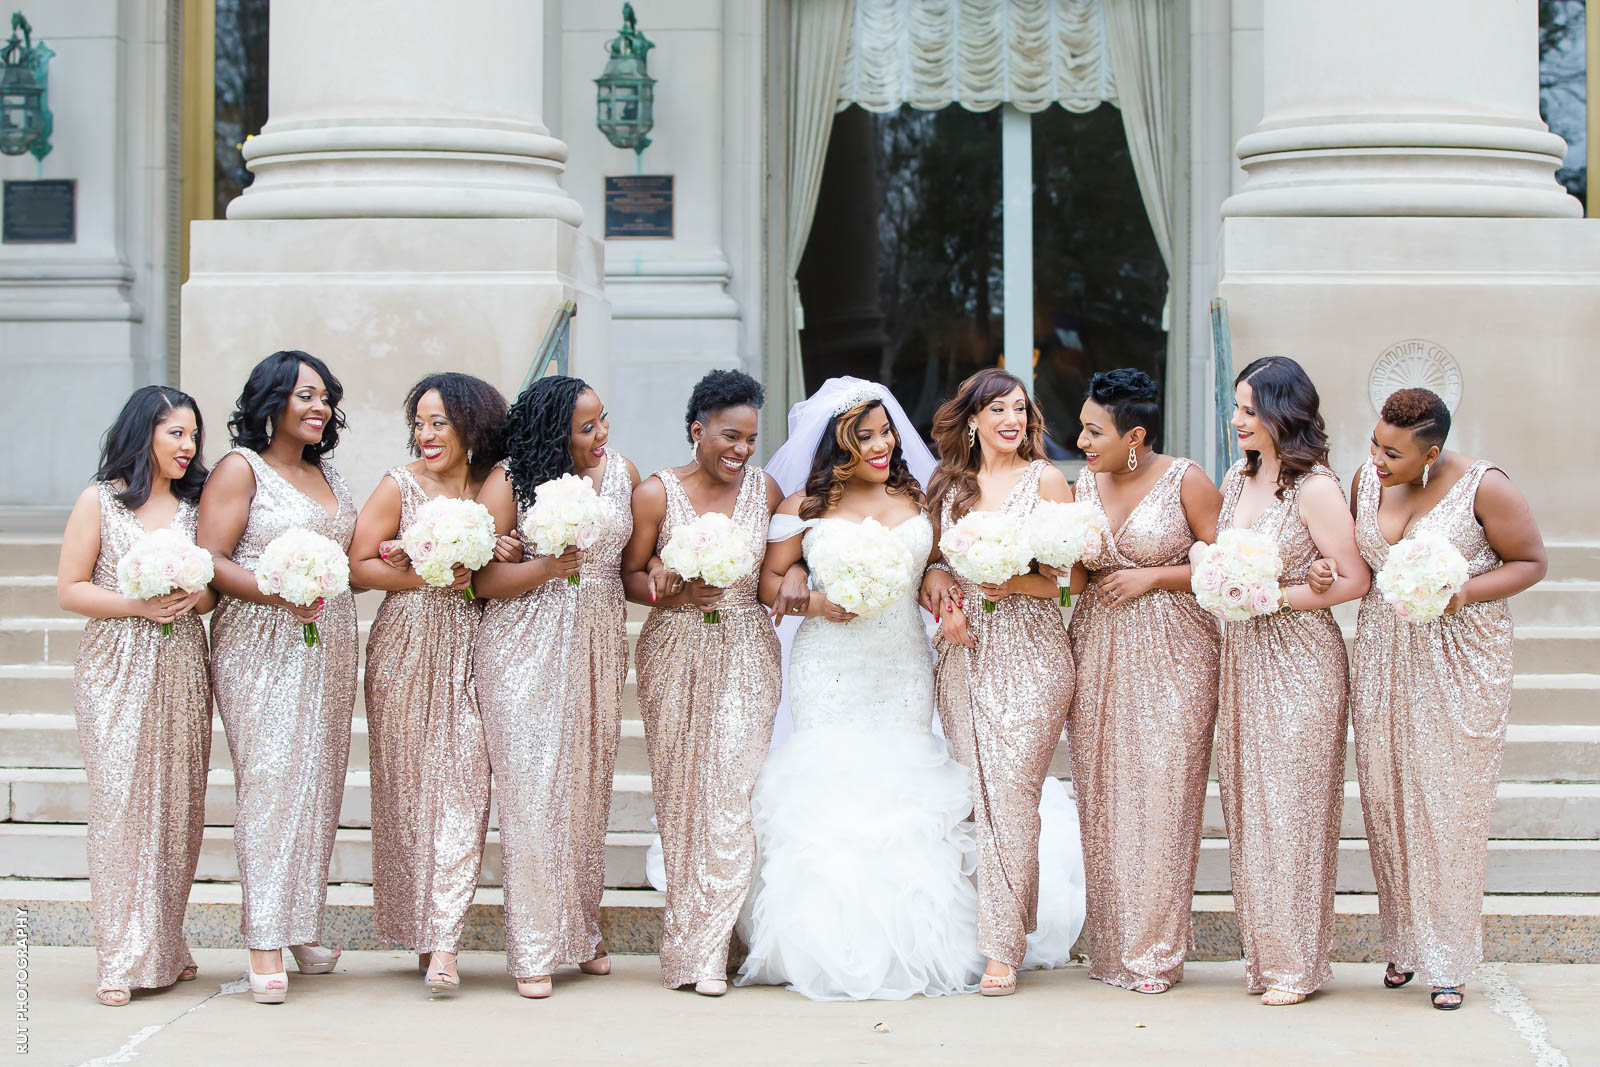 Great Bridesmaids Dresses for the ...